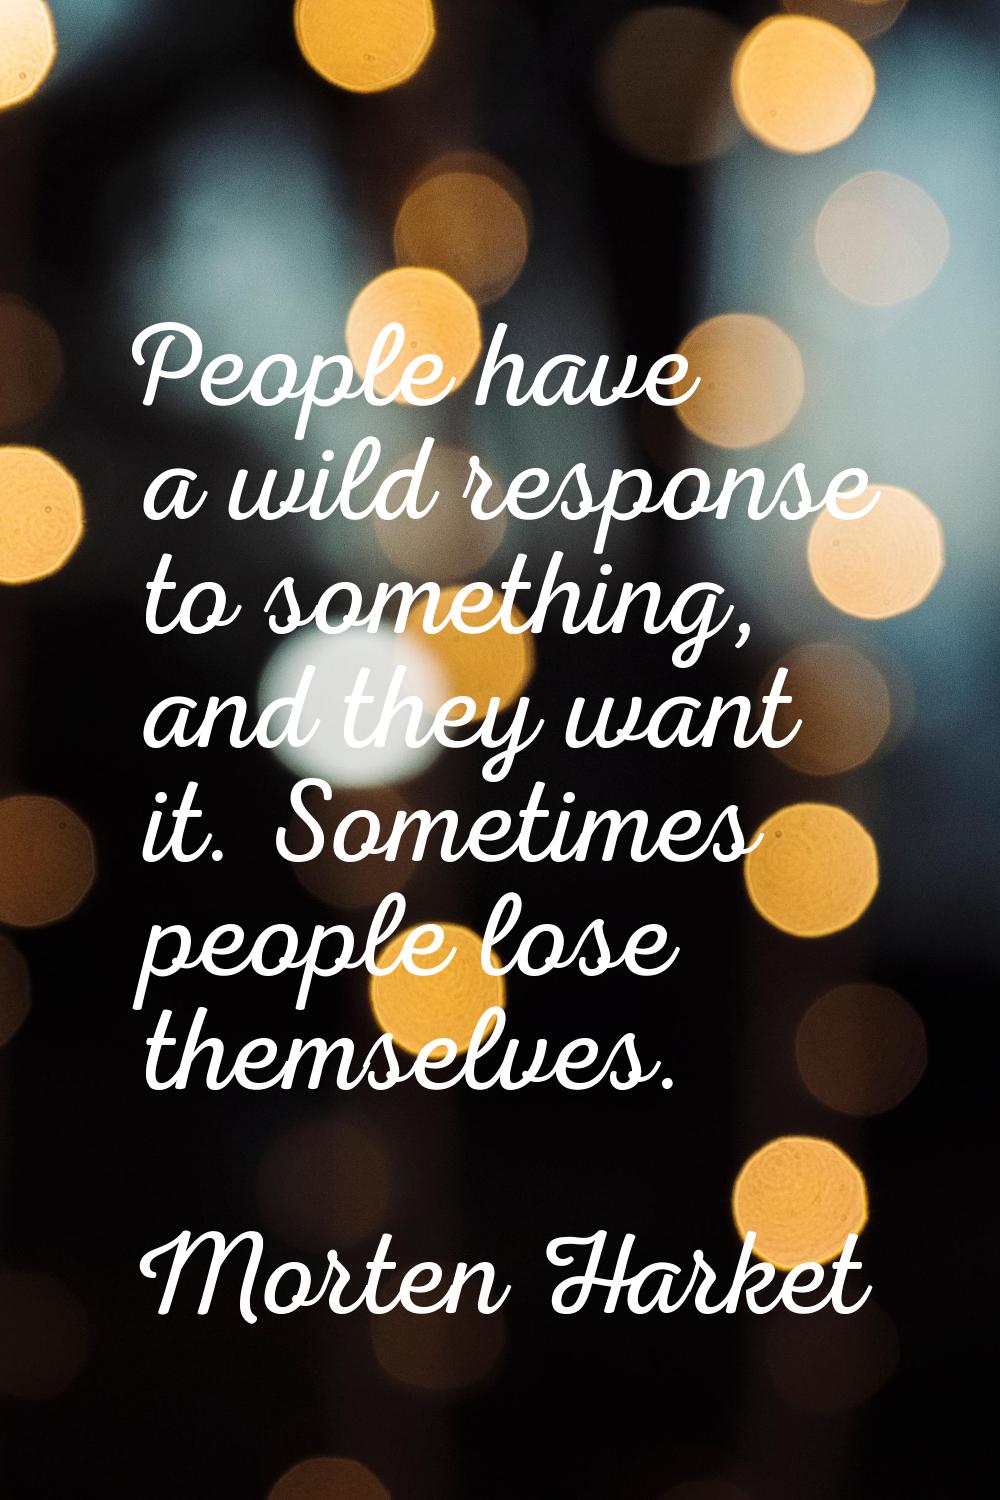 People have a wild response to something, and they want it. Sometimes people lose themselves.